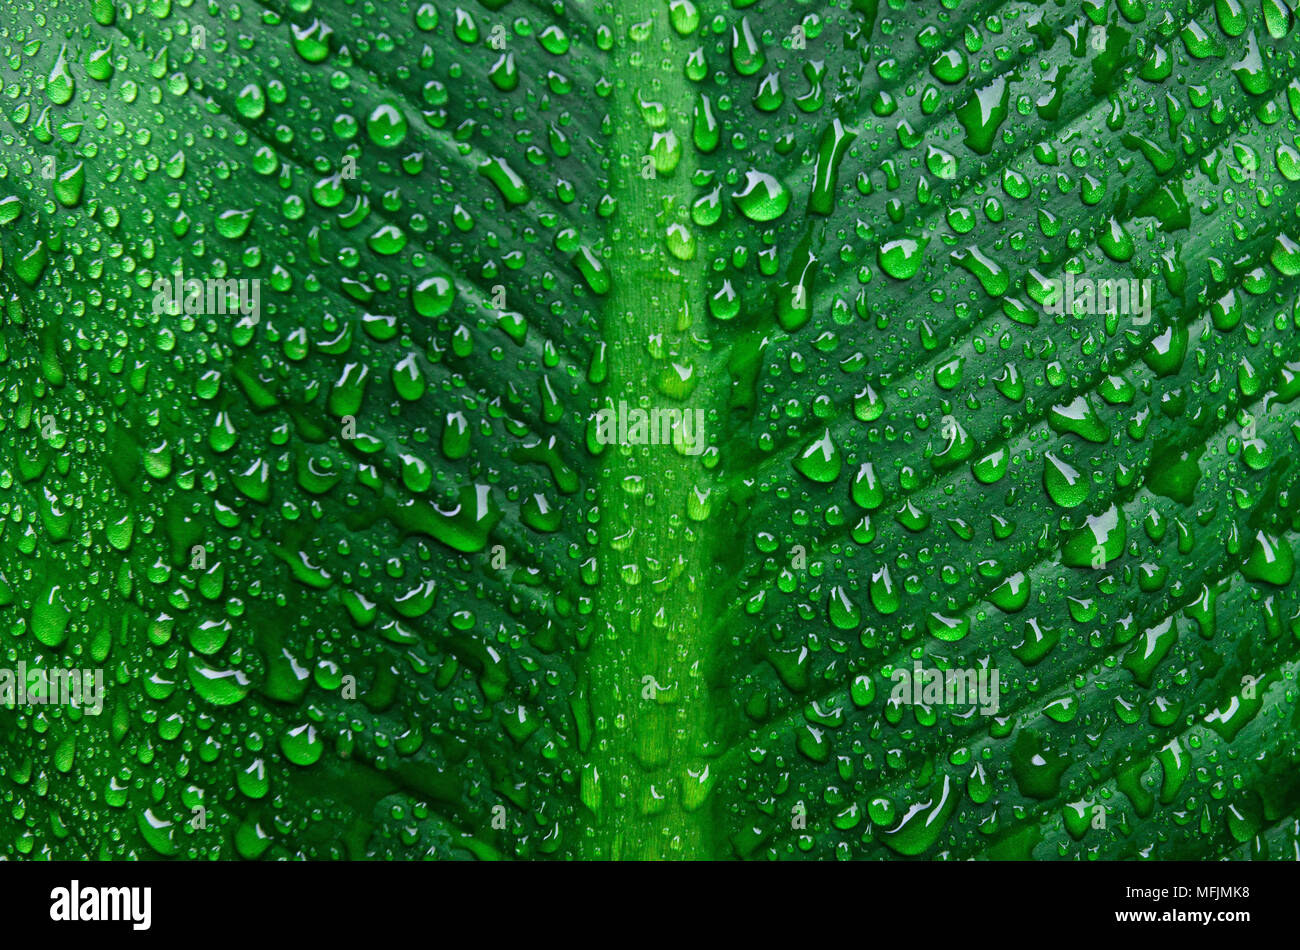 Close-up of green leaves and sundew on the leaf, Abstract background of green leaf with droplets and drop of dew. Stock Photo